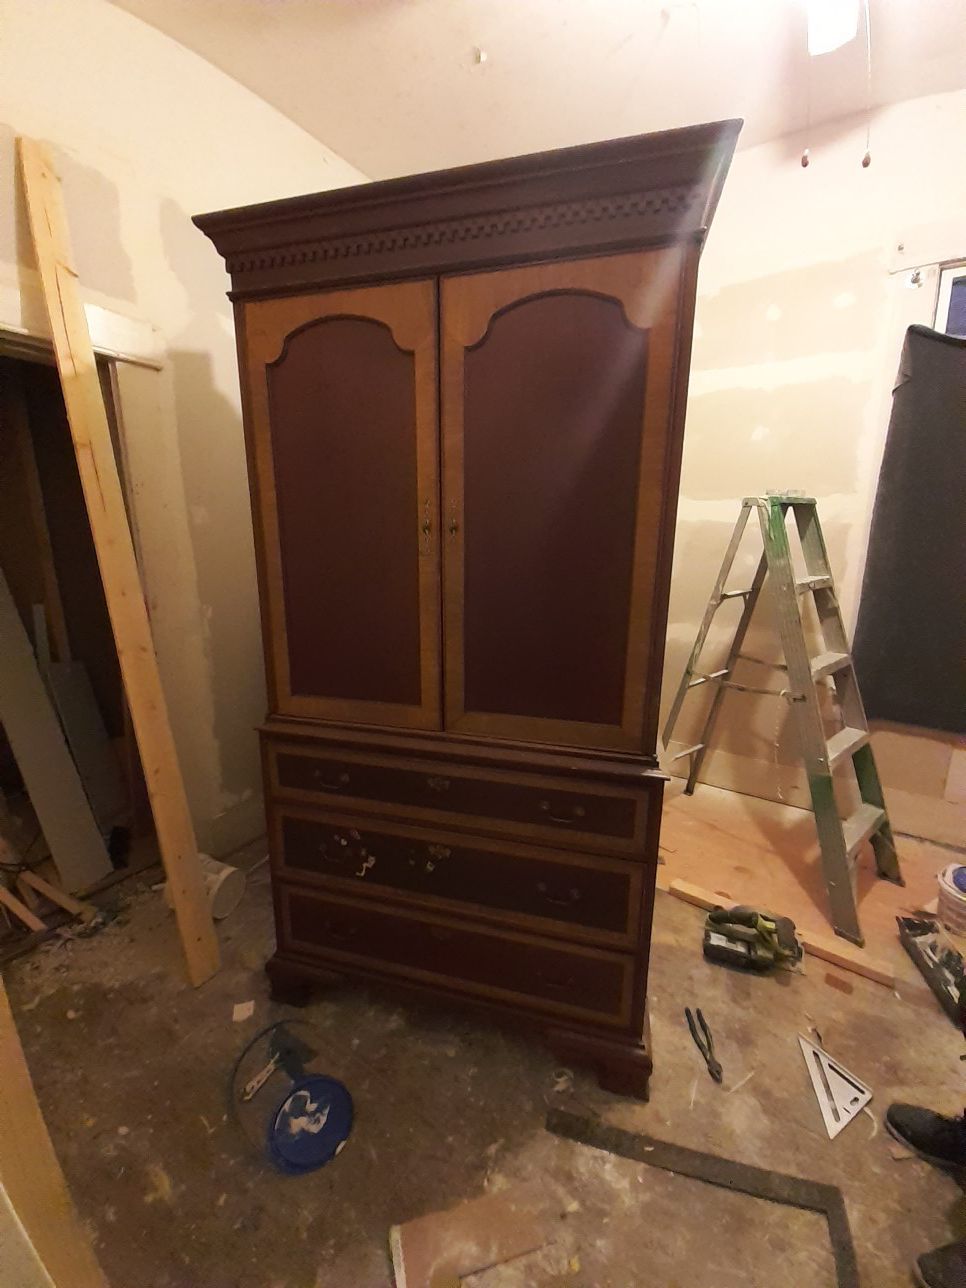 Cabinet/Armoire